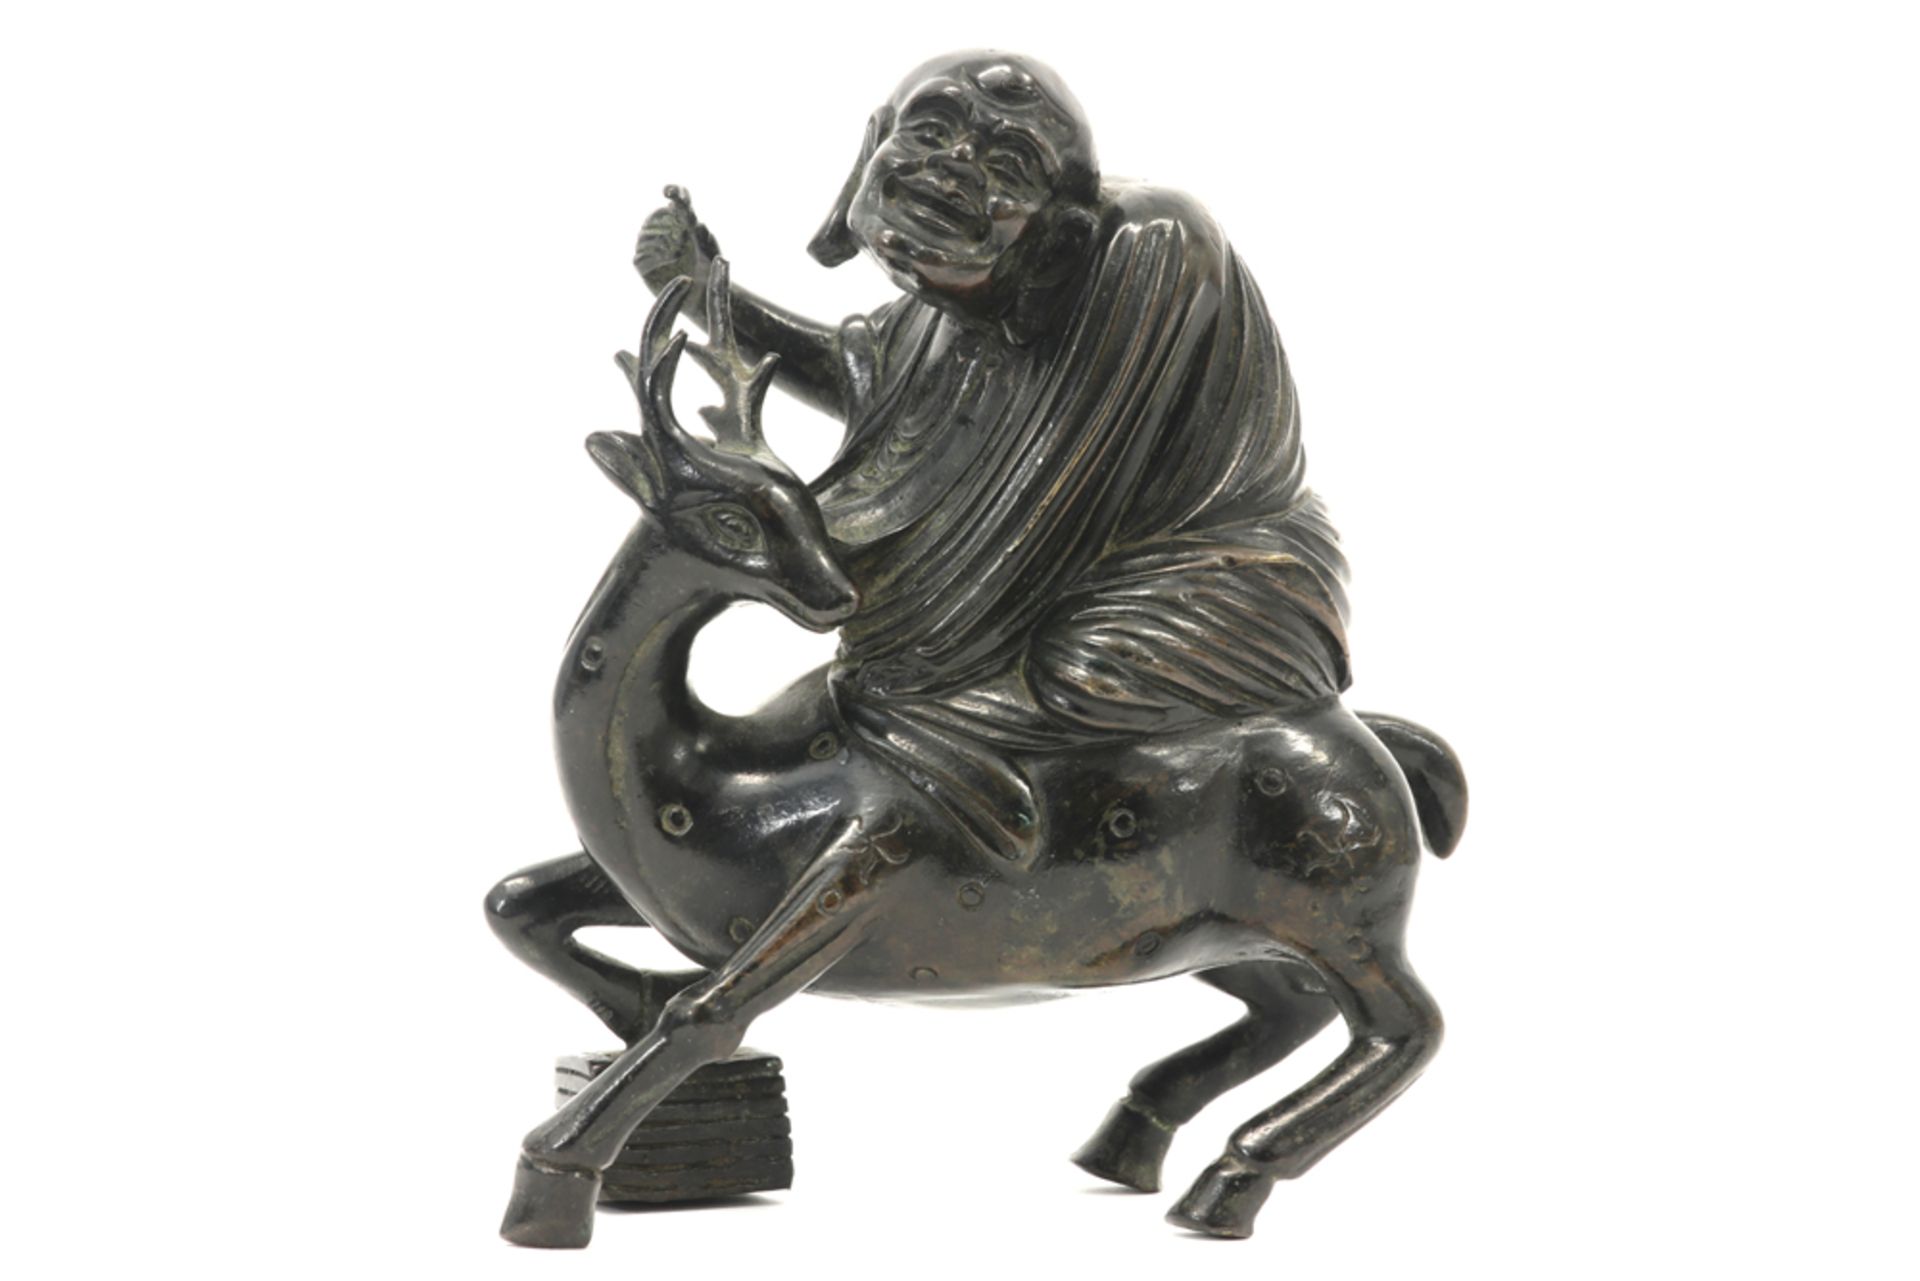 antique Chinese sculpture in bronze with a man sitting on a deer||Antieke Chinese sculptuur in brons